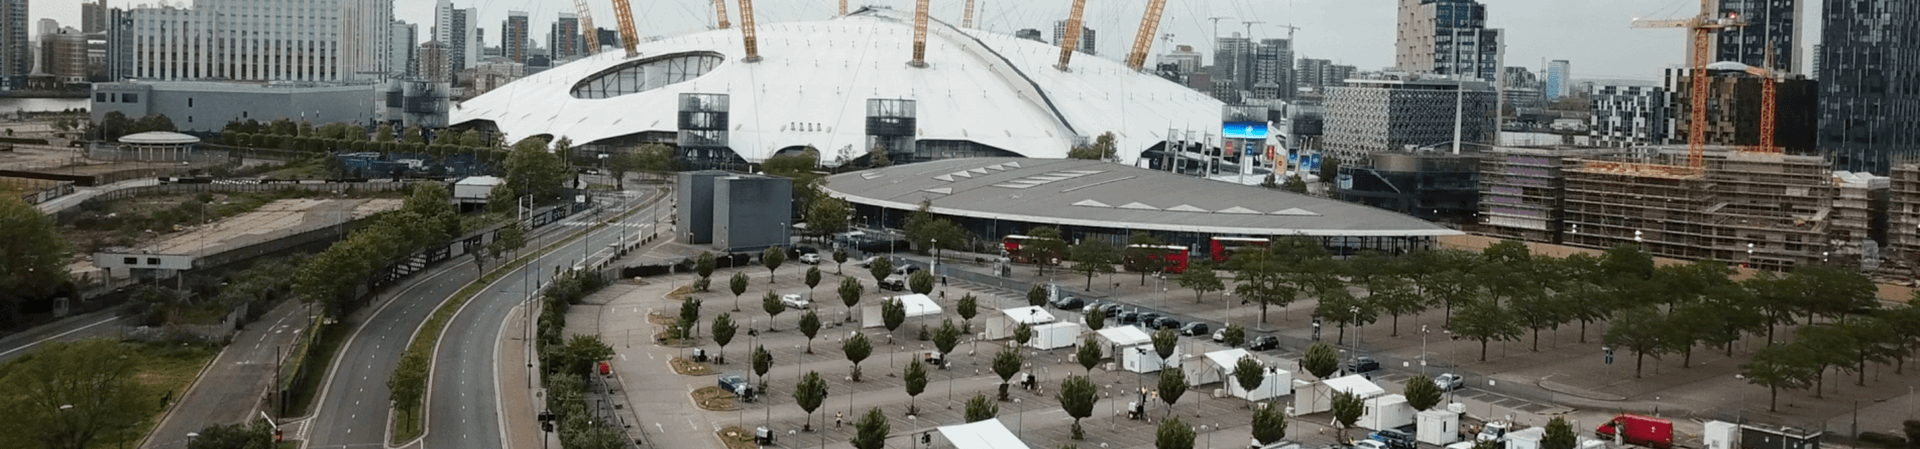 NHS test and trace centre at the o2 arena